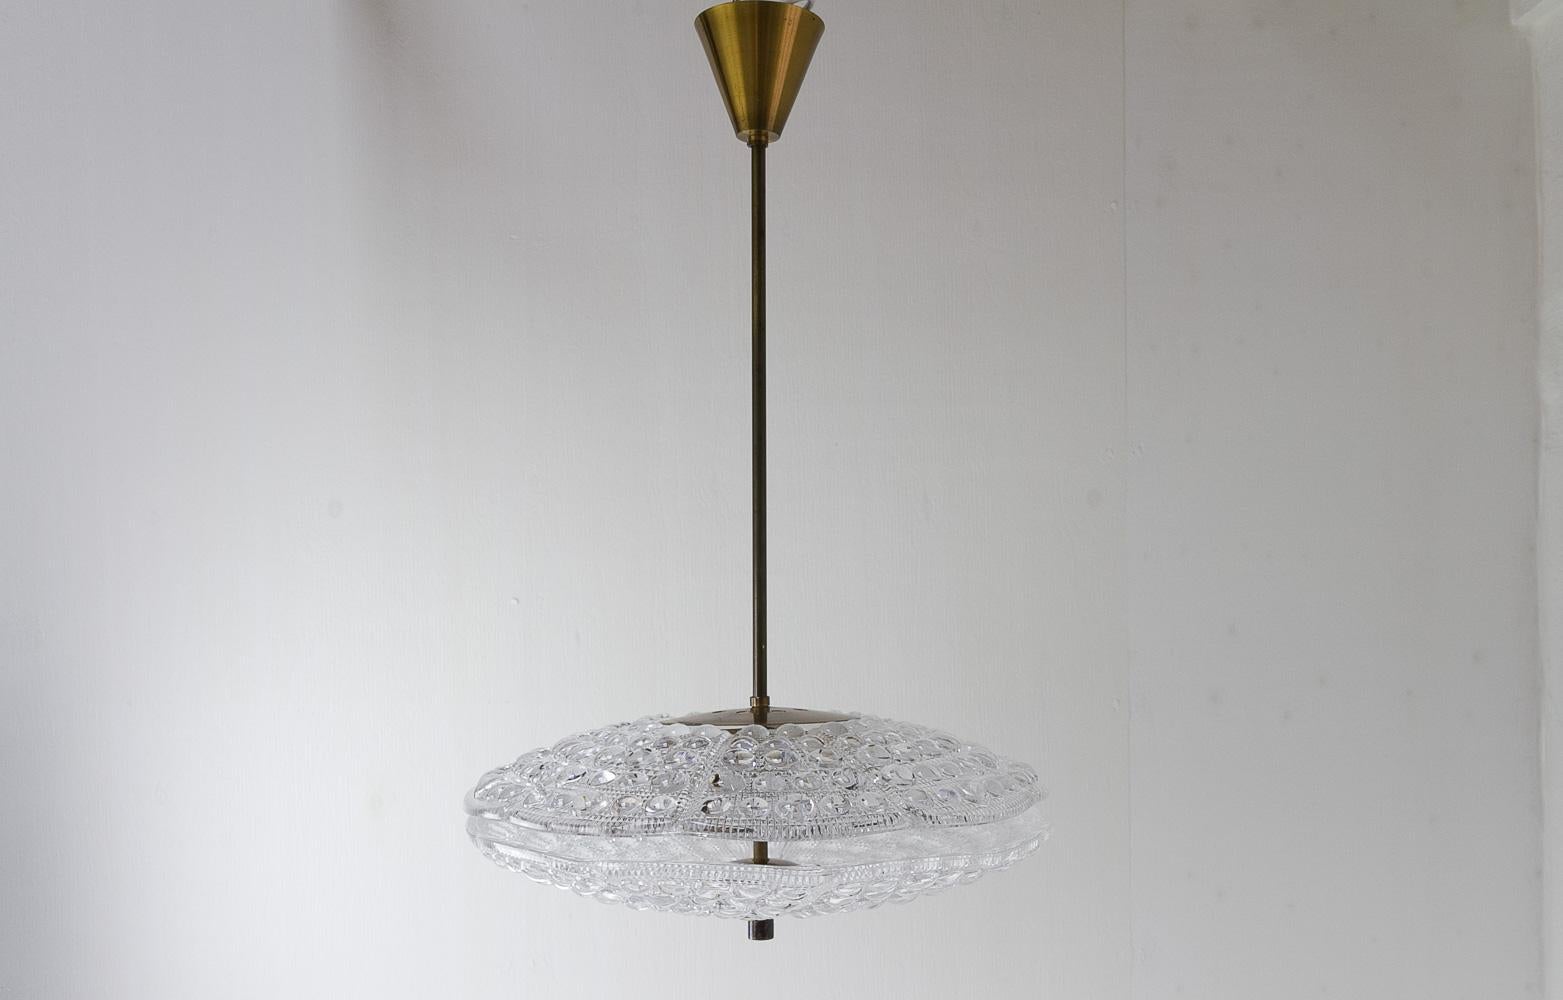 Orrefors Crystal and Brass Ceiling Pendant by Fagerlund for Lyfa, 1960s.
Scandinavian Mid-Century Modern Brass and crystal glass chandelier. Produced by Lyfa Denmark, designed by Carl Fagerlund and the two thick textured crystal glass shades are